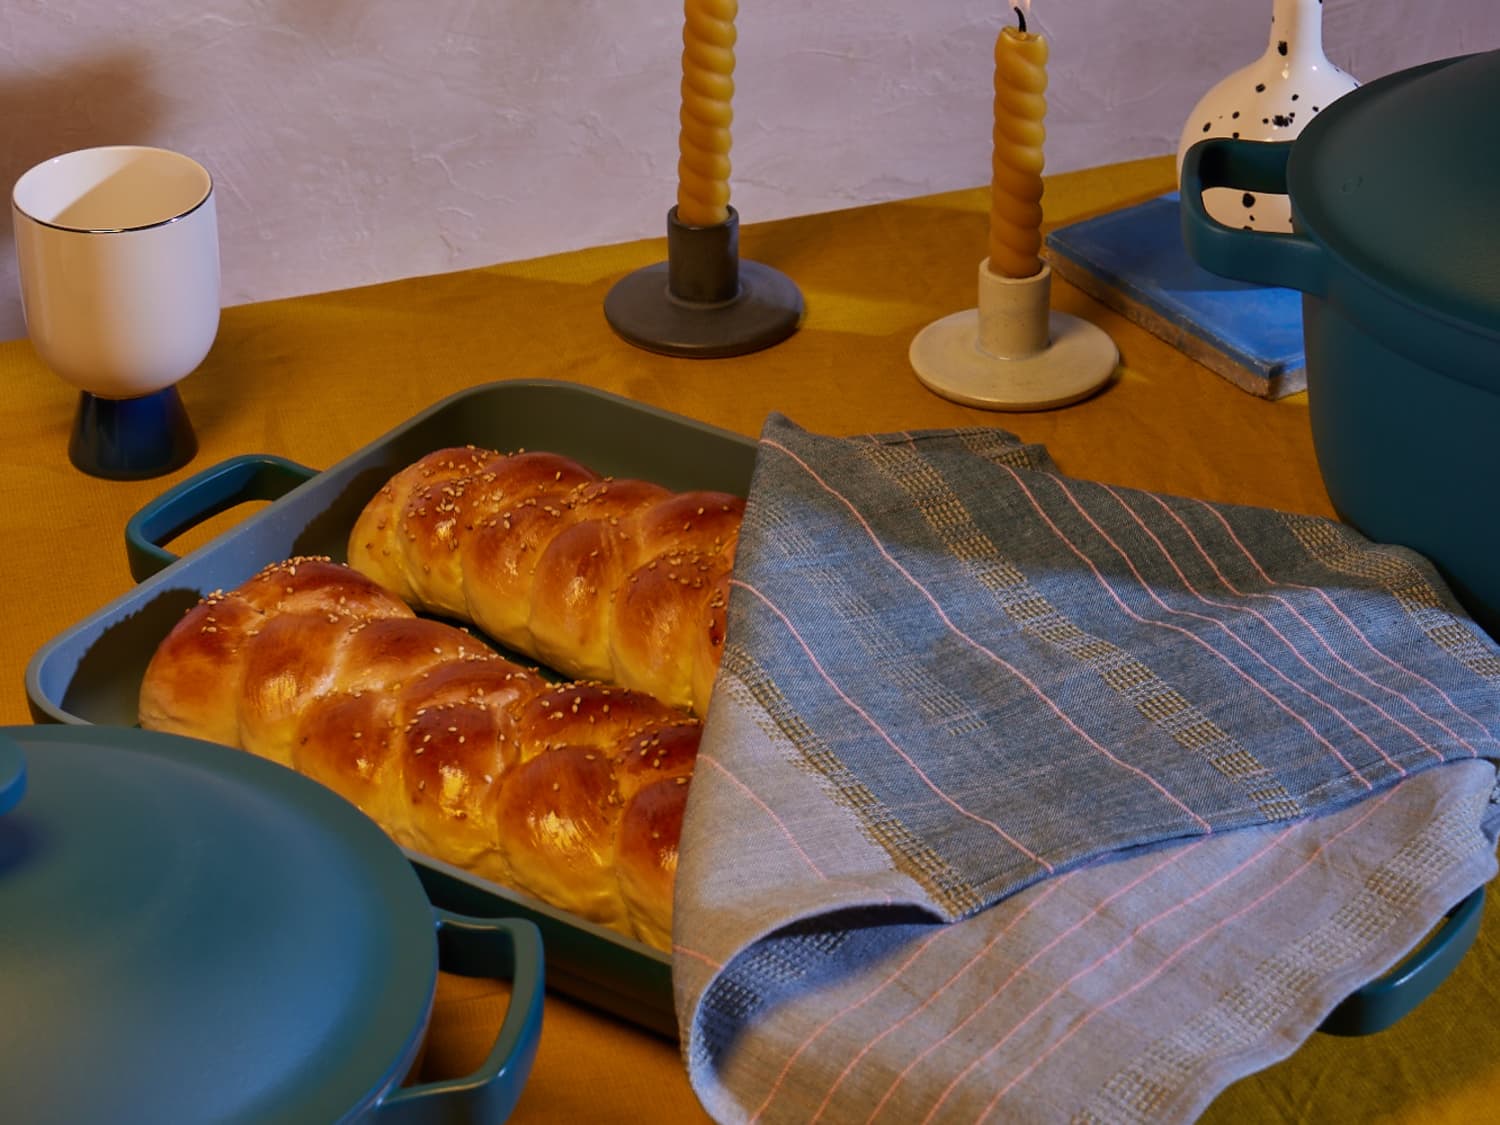 Table for All, Challah & Chutzpah: A Celebration of Jewish Culture, Season 2, Episode 5